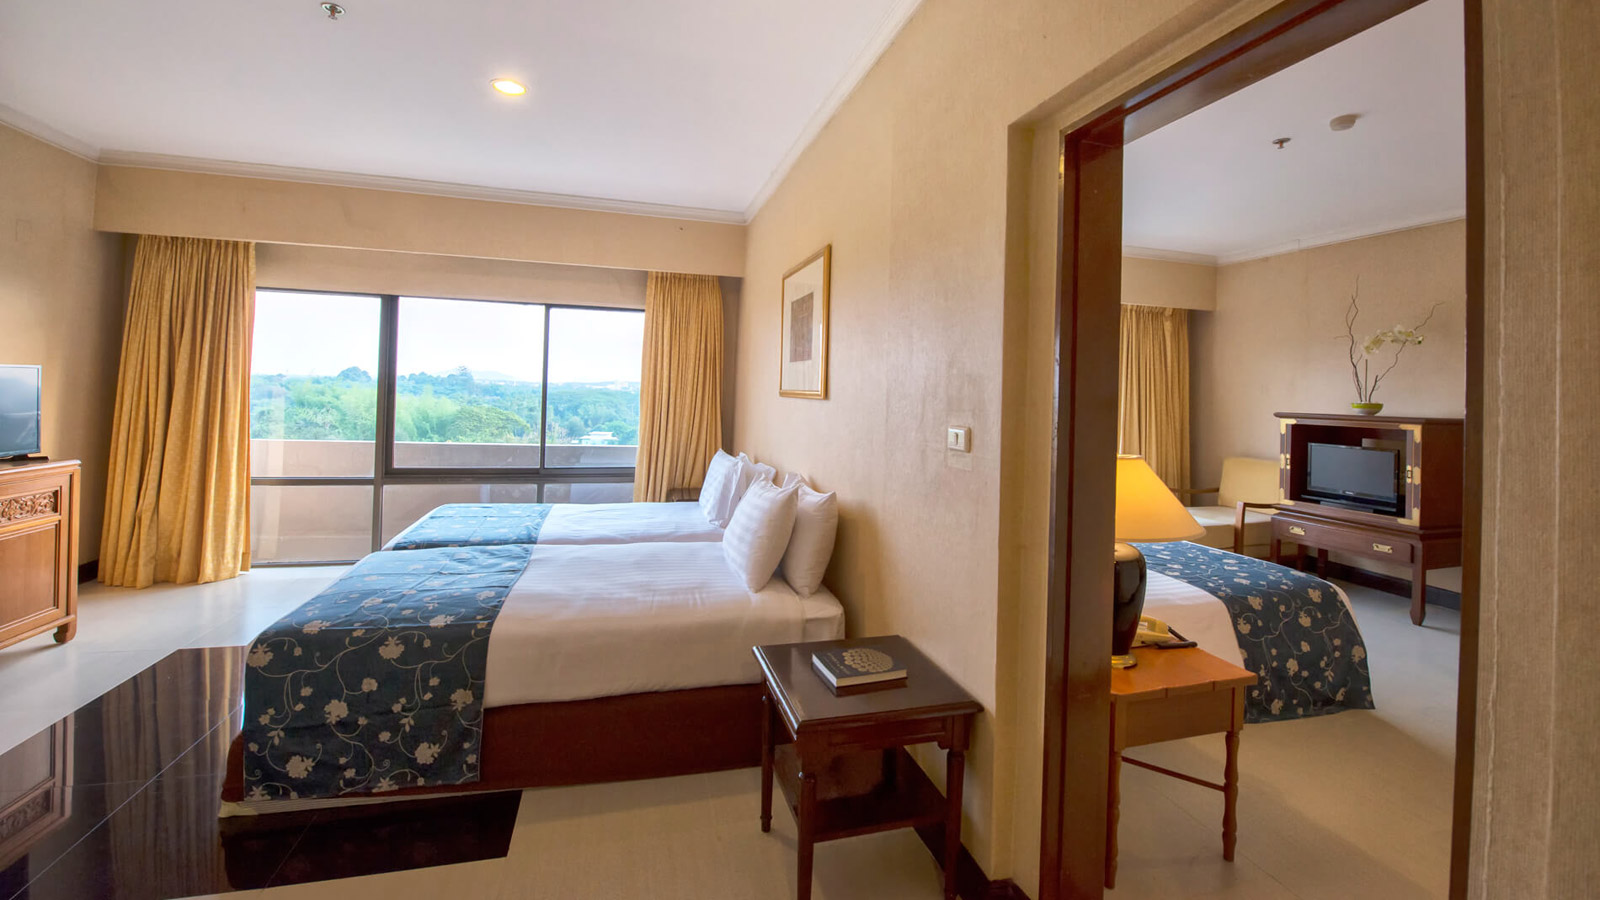 Junior Family Suites at Loei Palace Hotel - Loei Palace Hotel